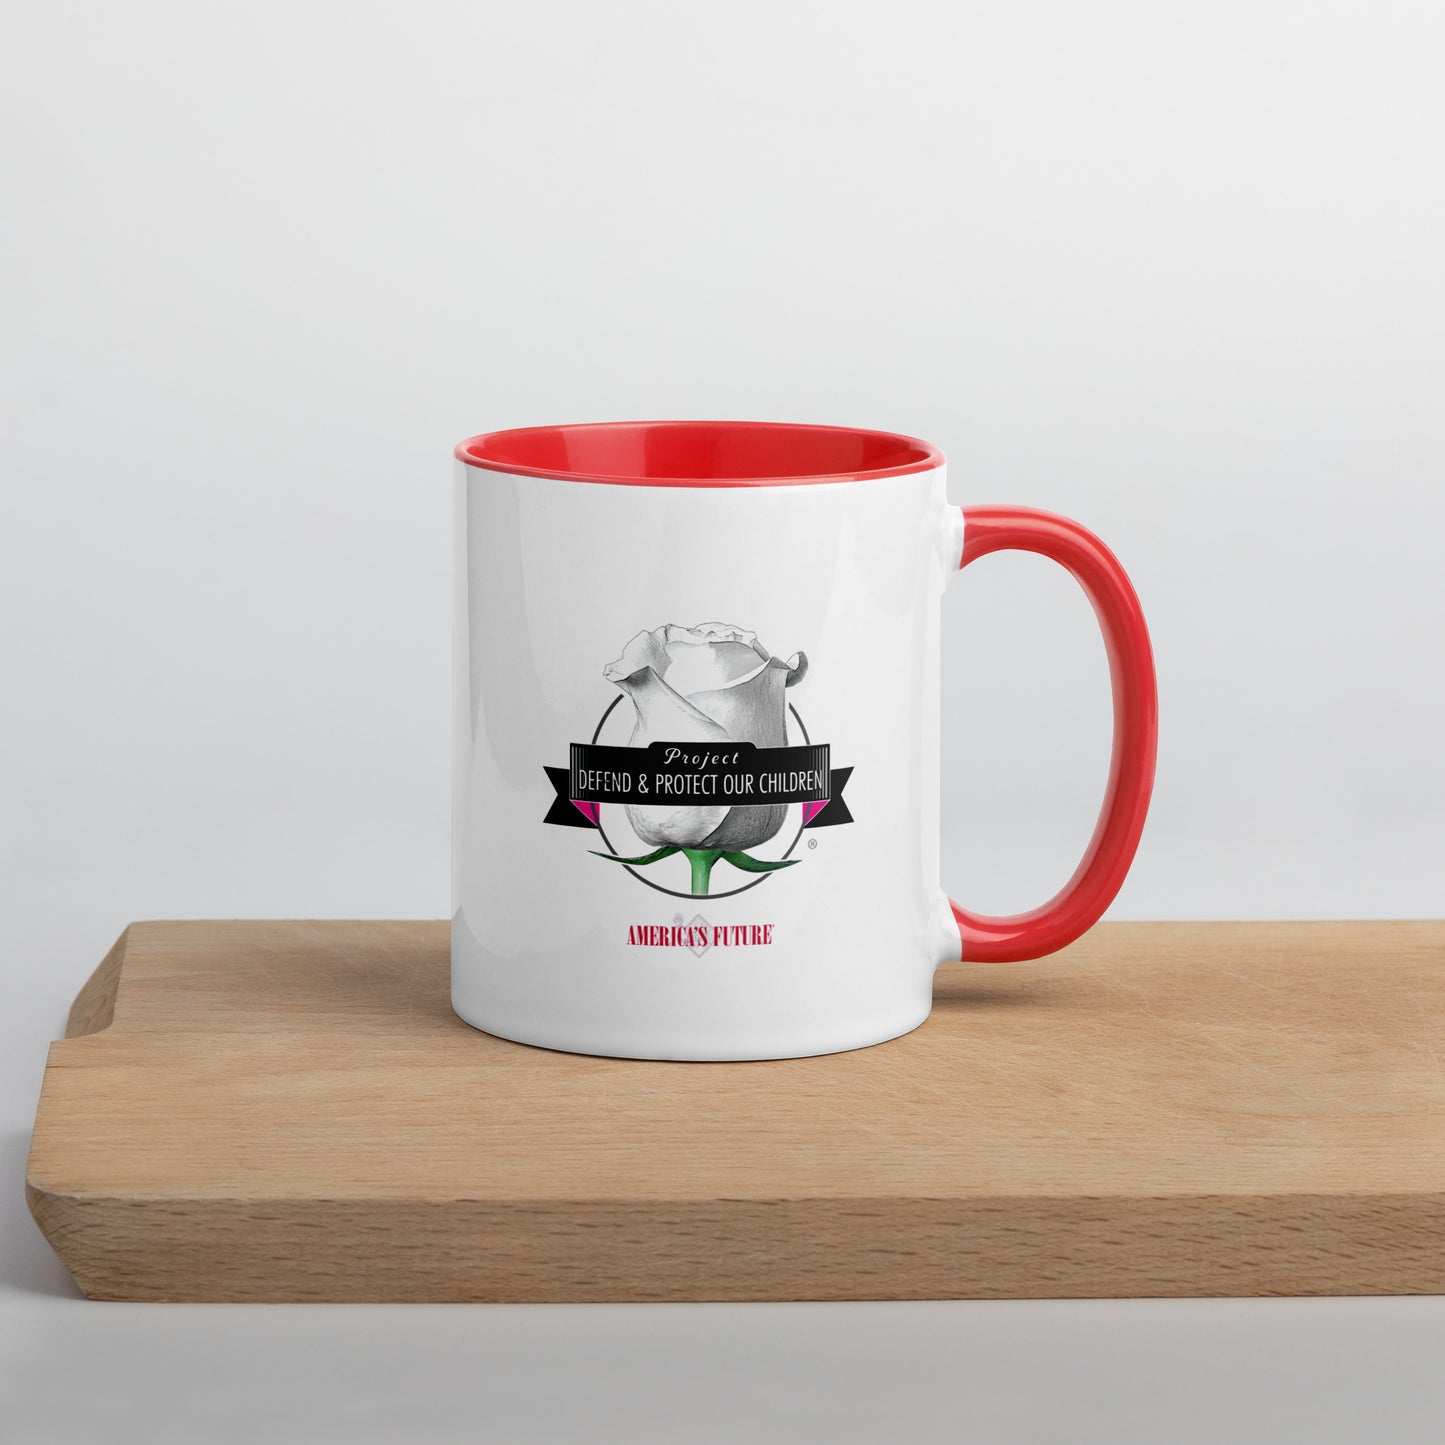 Project Defend & Protect Our Children - Mug with Color Inside